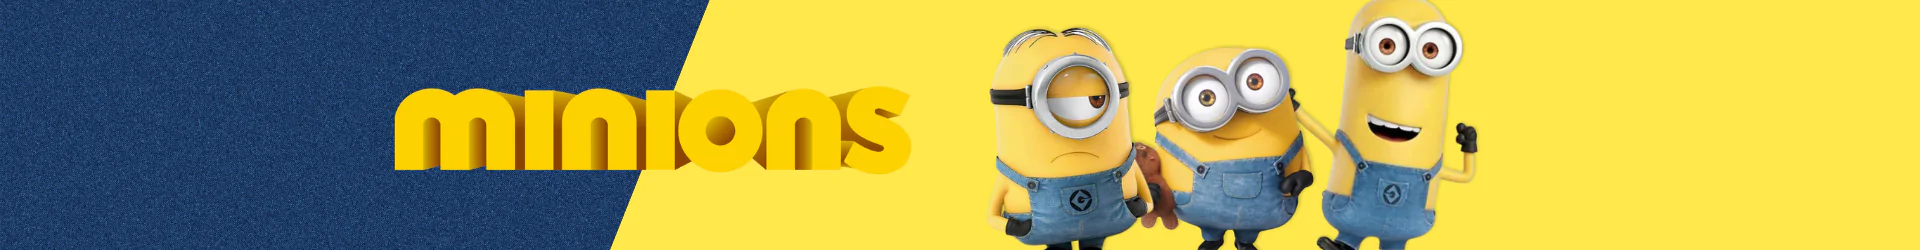 Minions (Gru) products banner